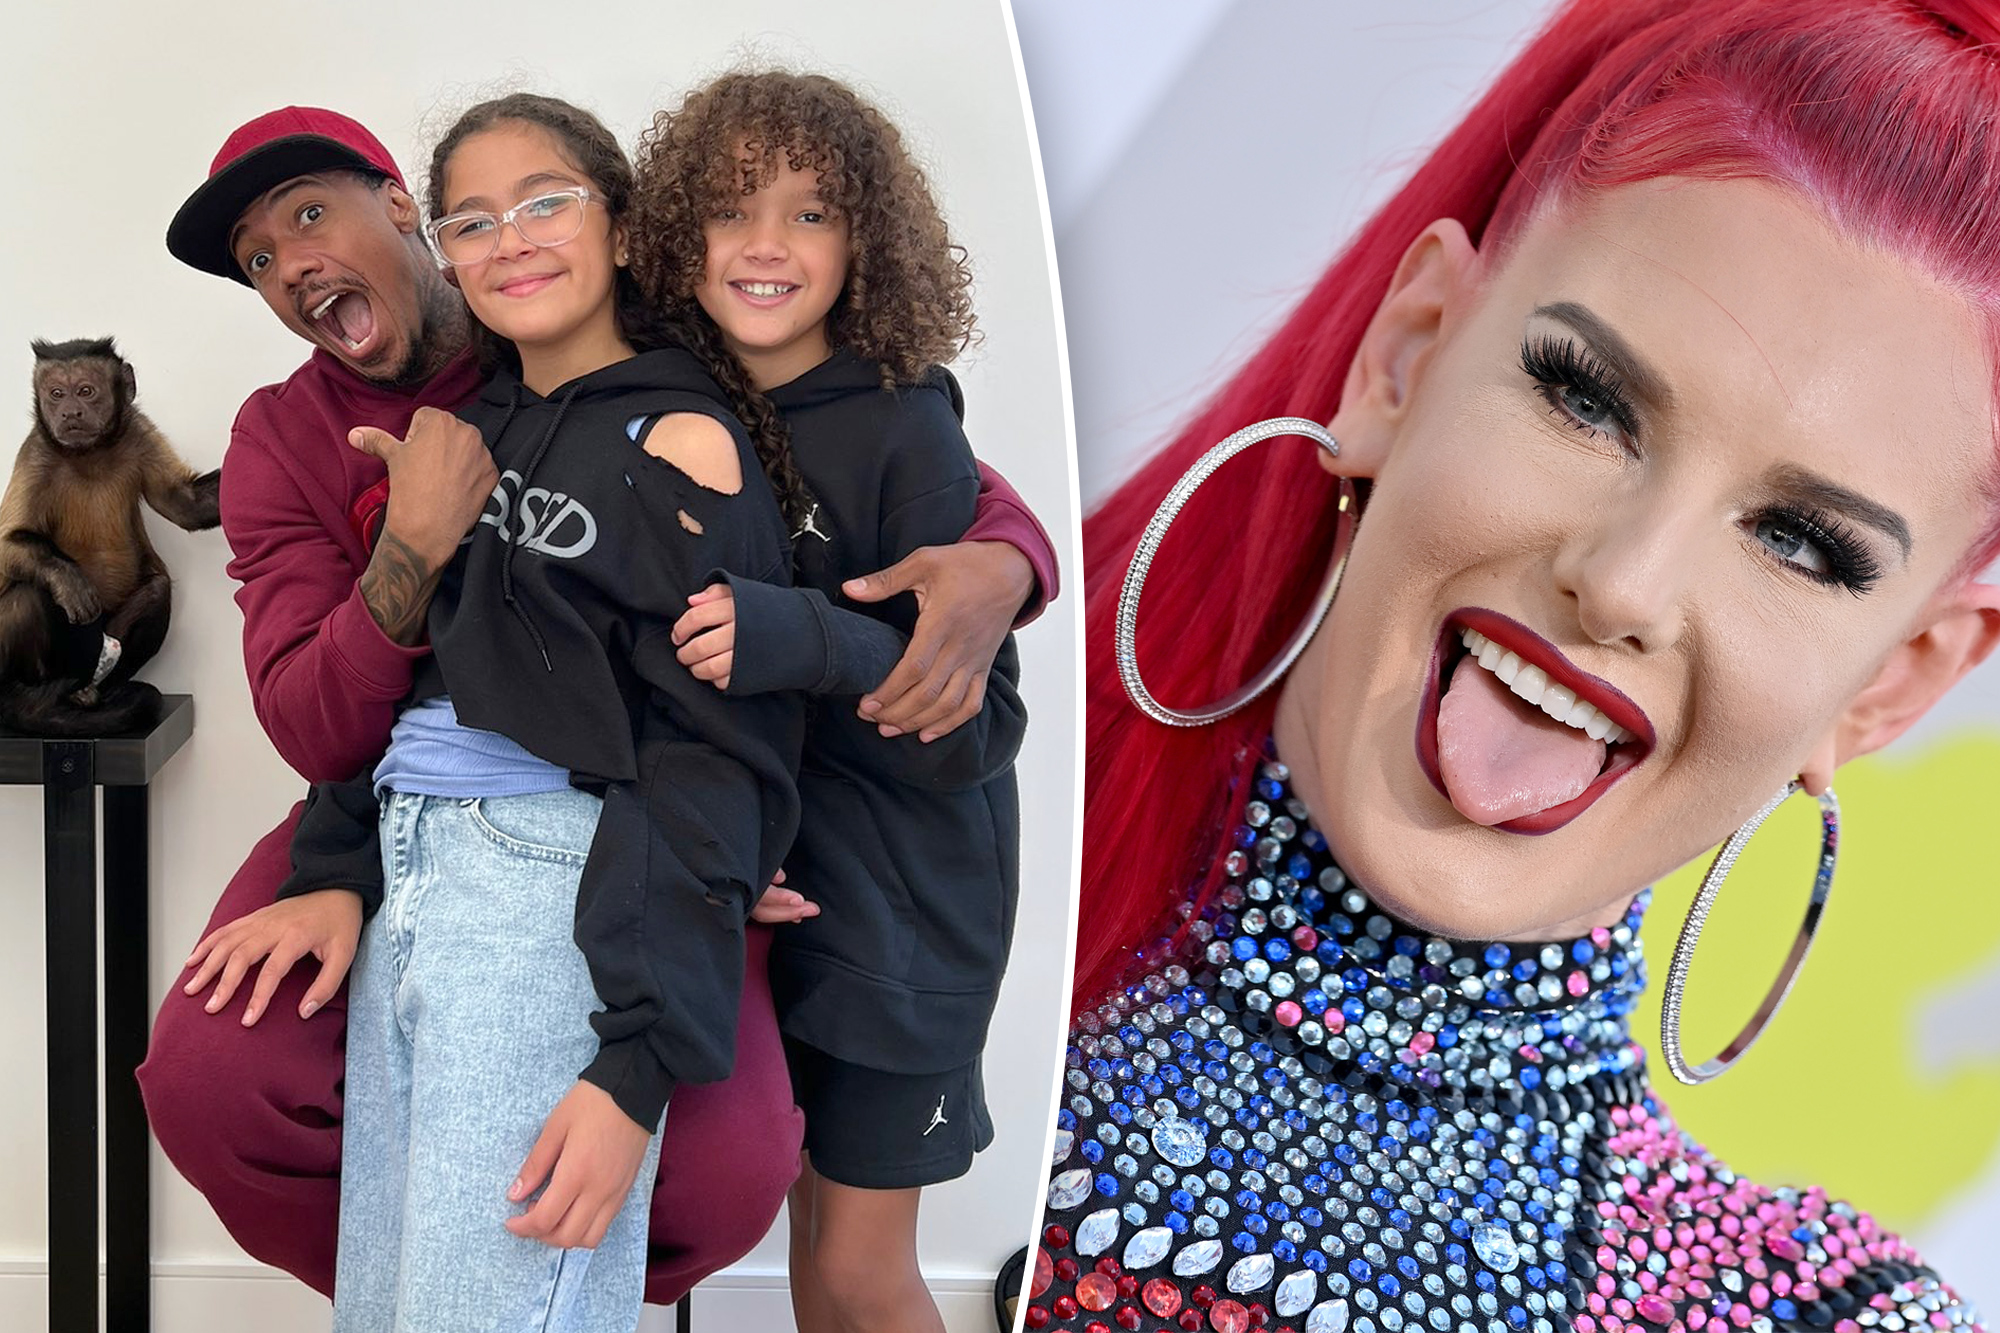 "Wild N' Out" star Justina Valentine says Nick Cannon's 'junk" never takes vacations.